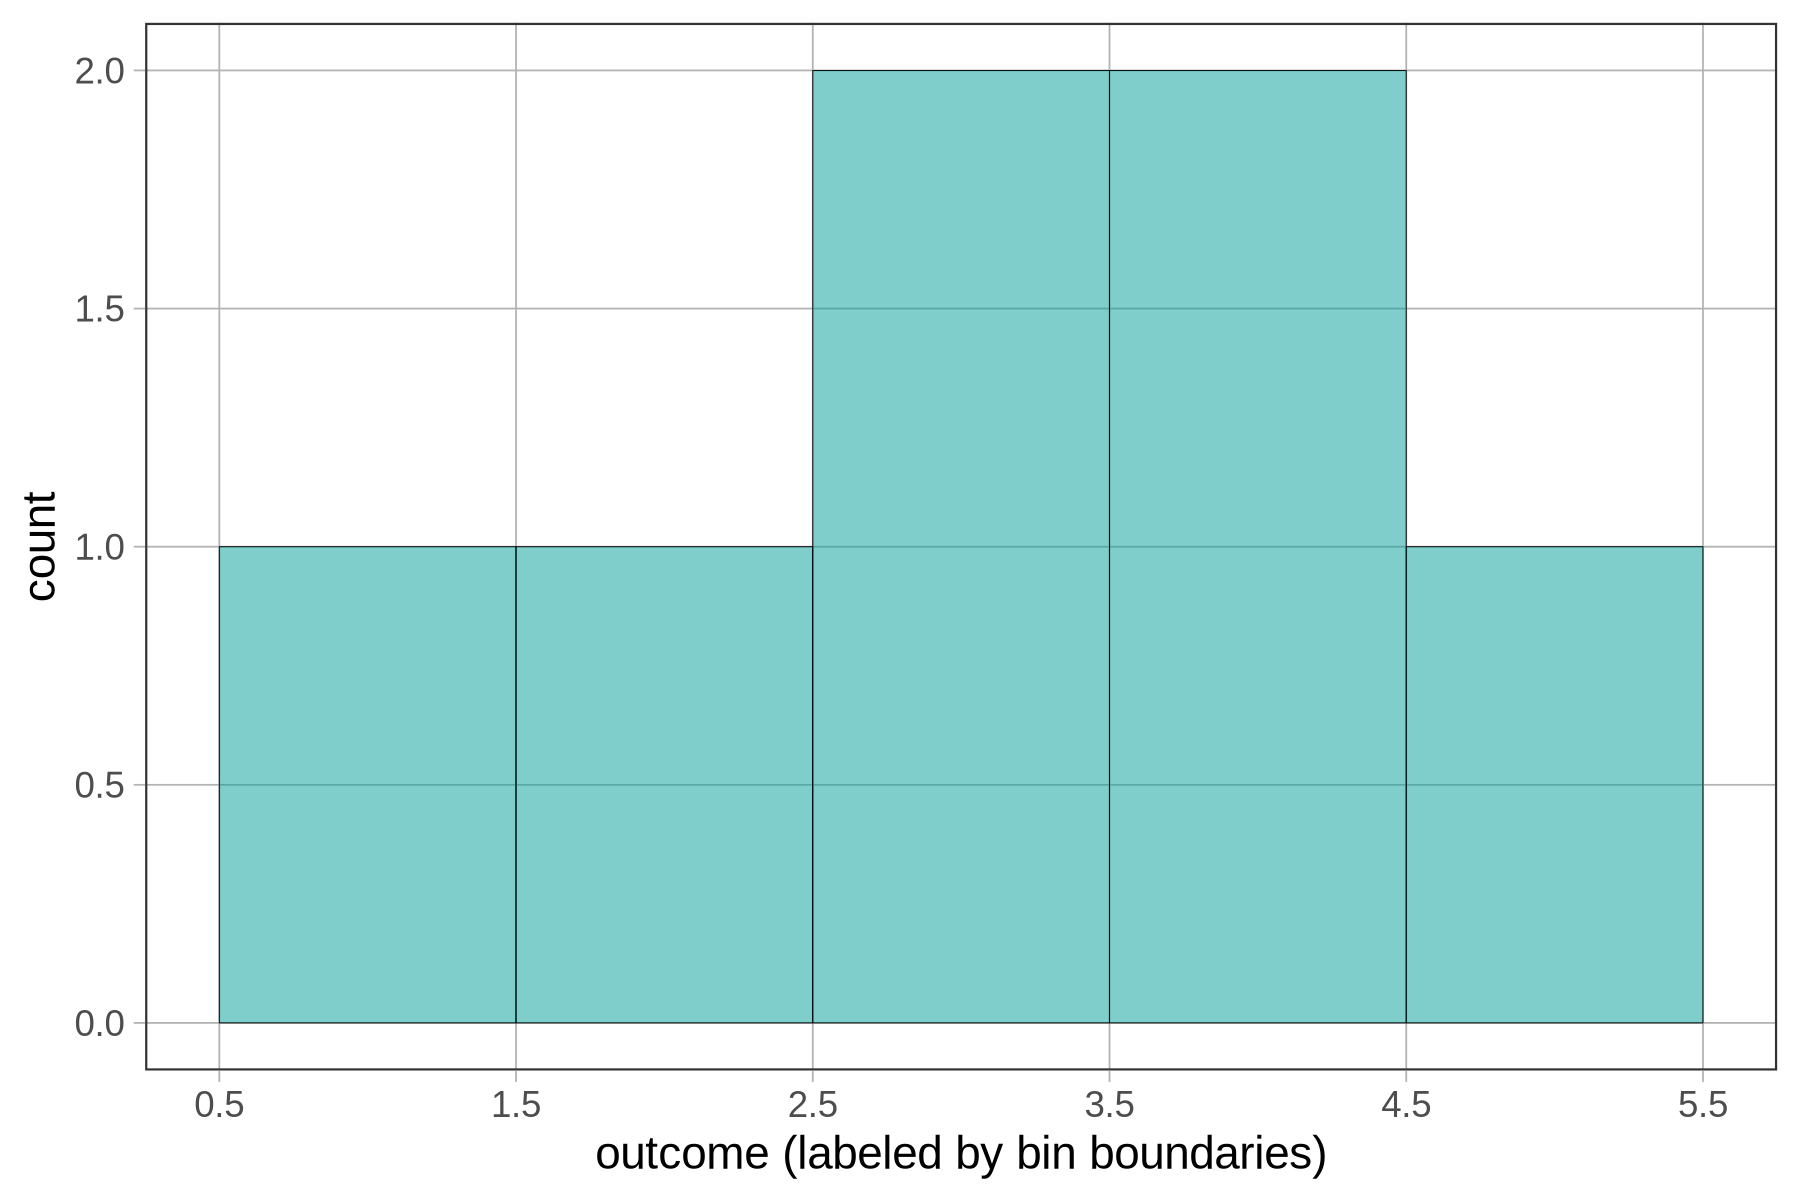 The same histogram as above re-labeled so that the bin 3.2 went into previously labeled 3, now is labeled from 2.5 to 3.5.